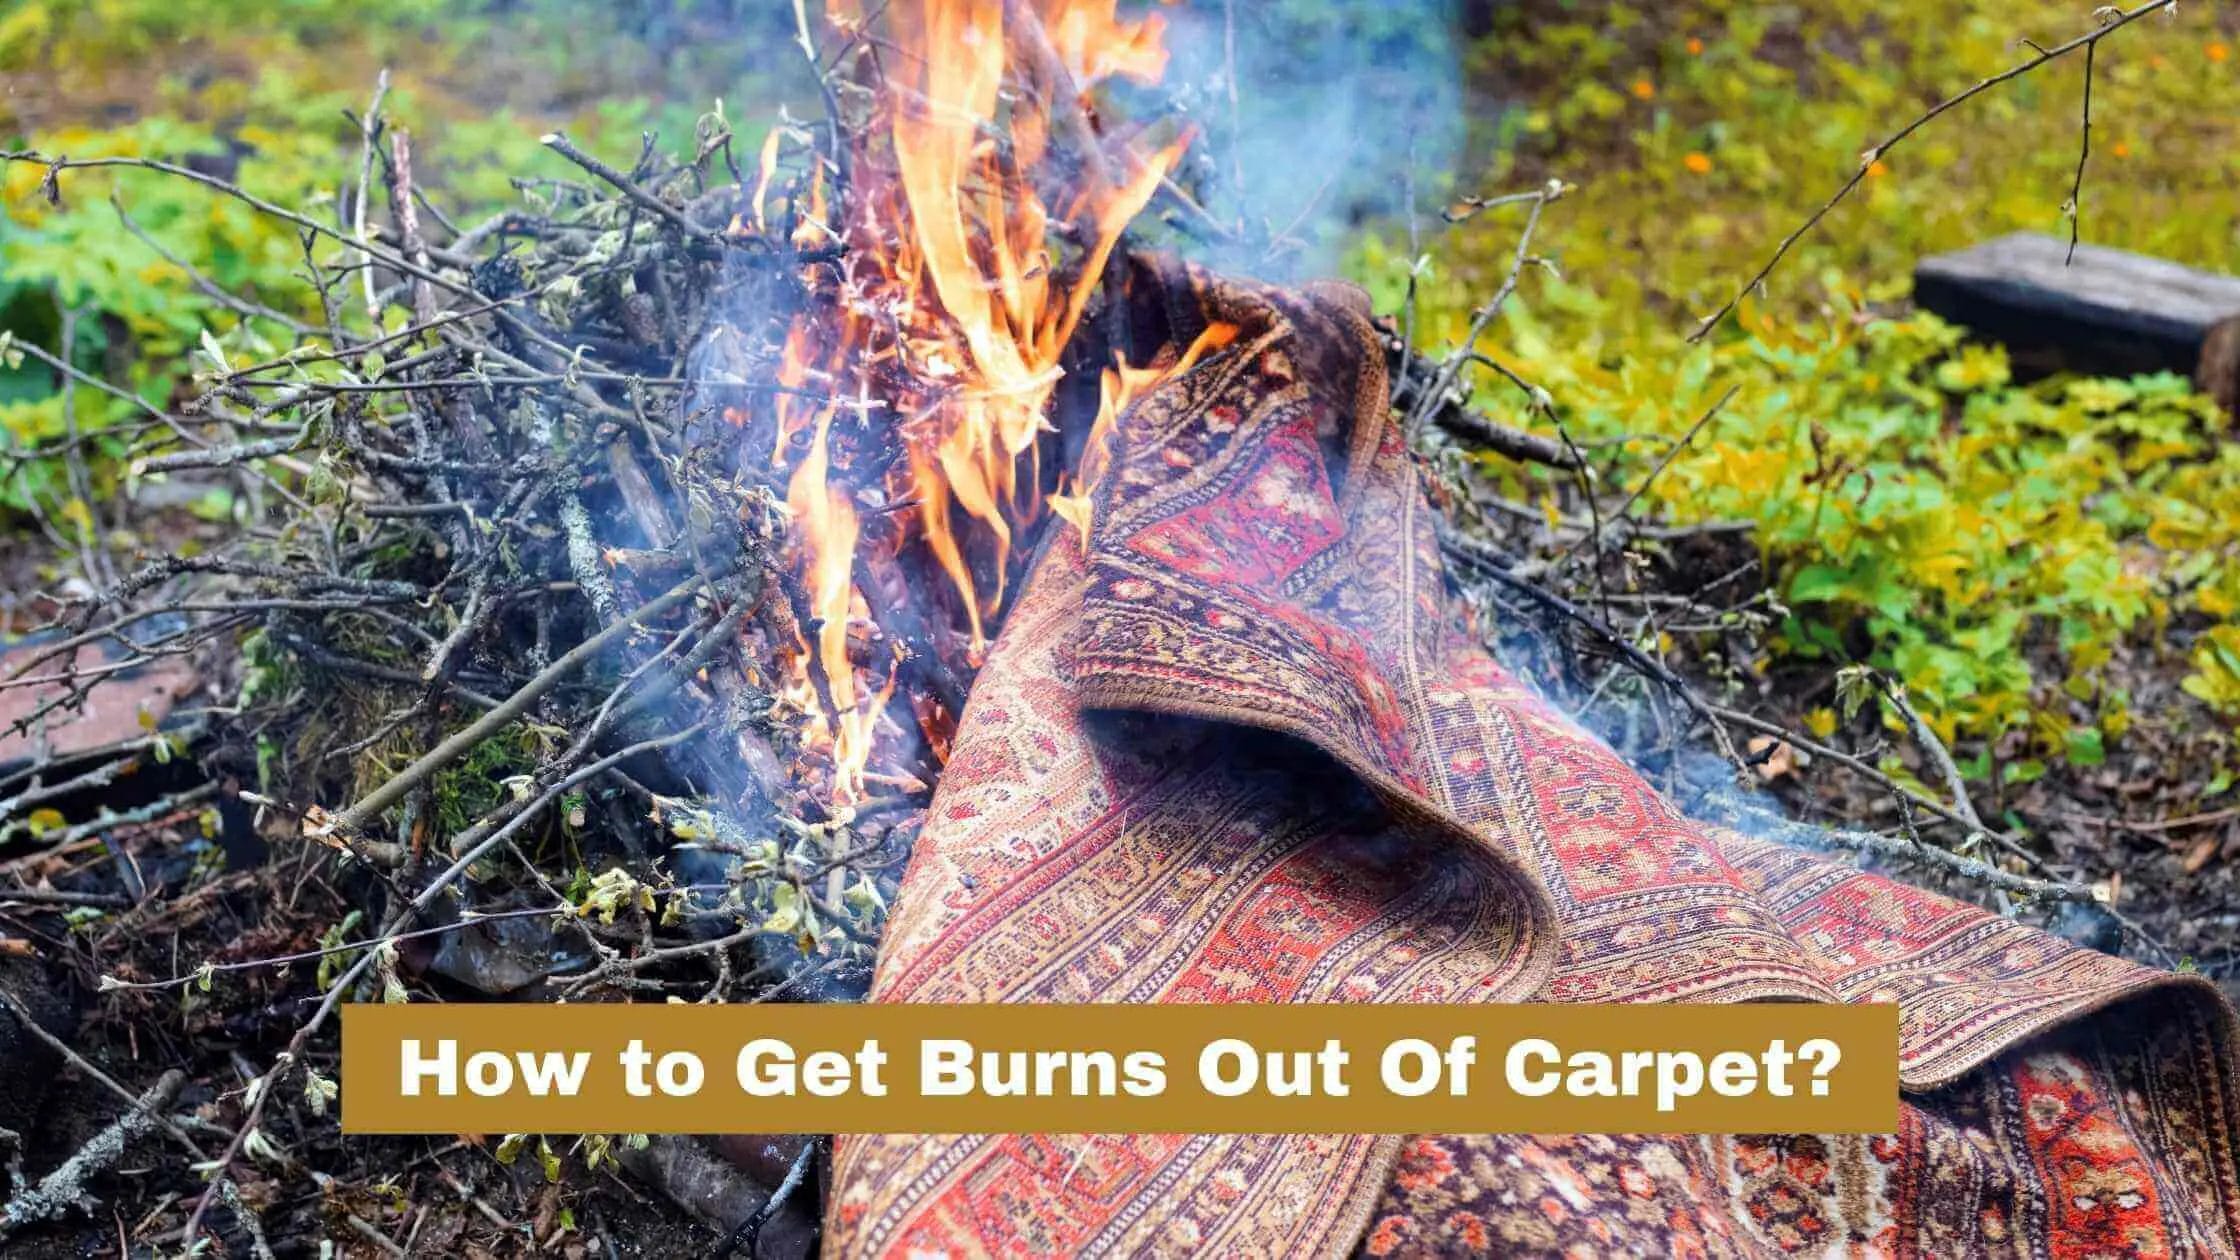 How to Get Burns Out Of Carpet